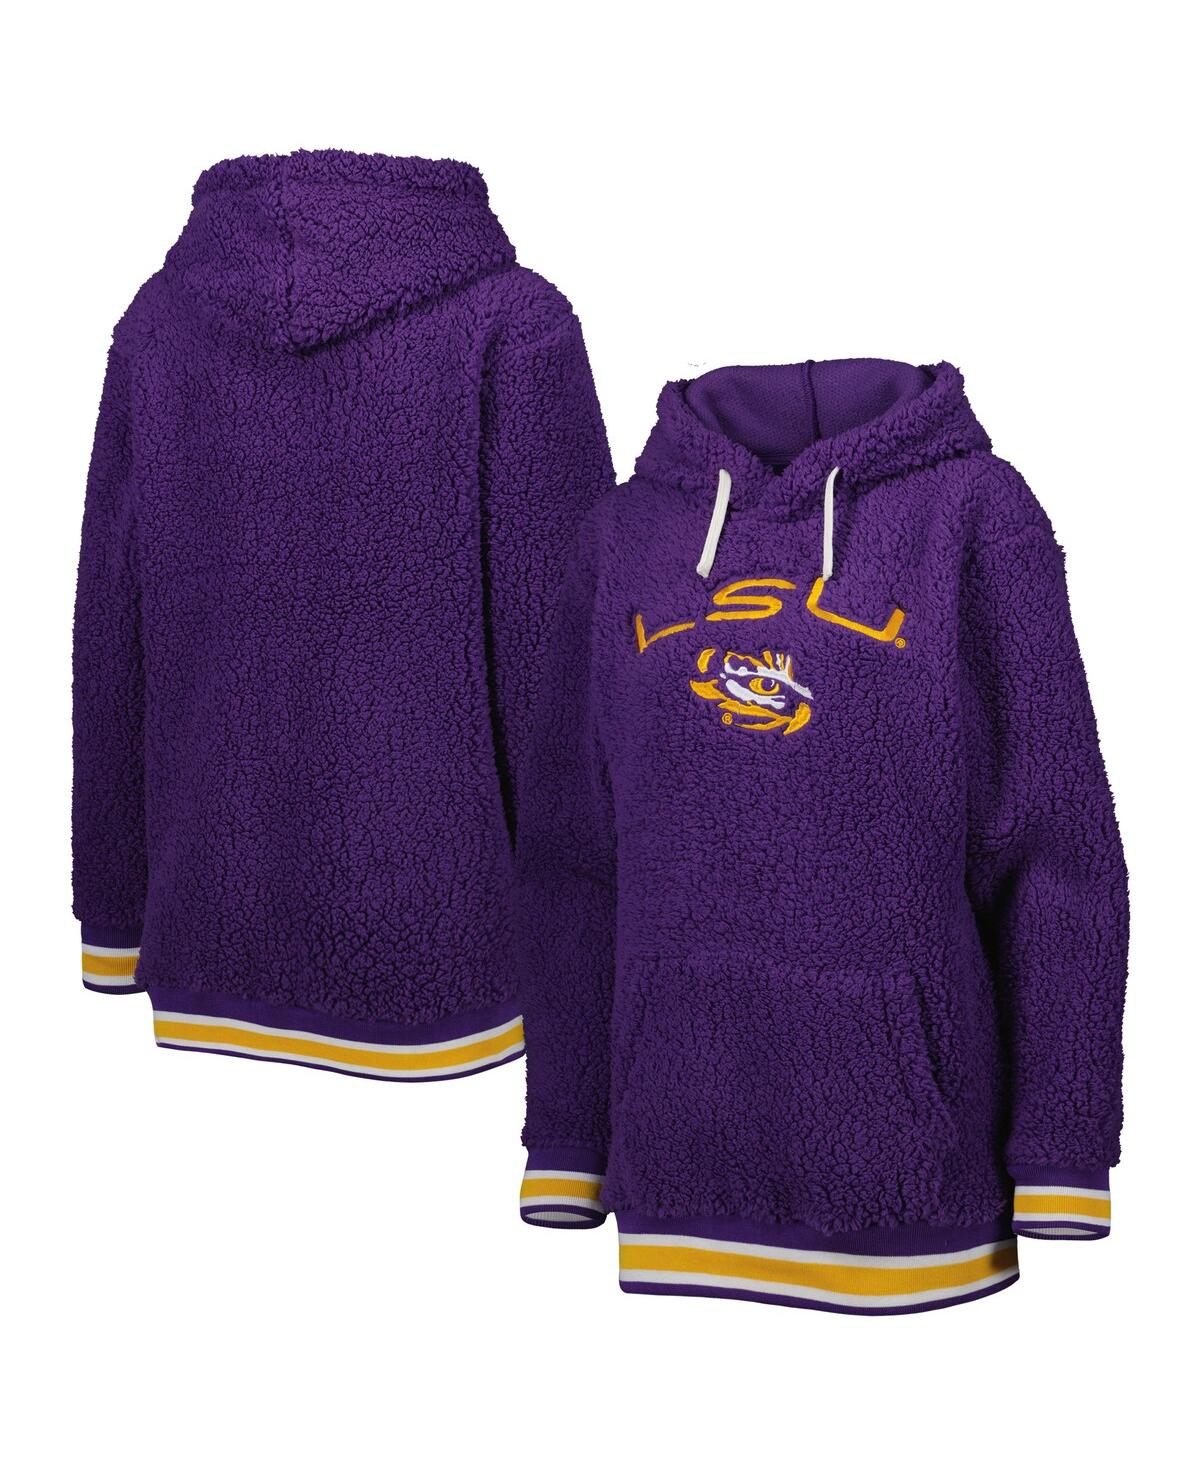 G-III 4HER BY CARL BANKS WOMEN'S G-III 4HER BY CARL BANKS PURPLE LSU TIGERS GAME OVER SHERPA PULLOVER HOODIE